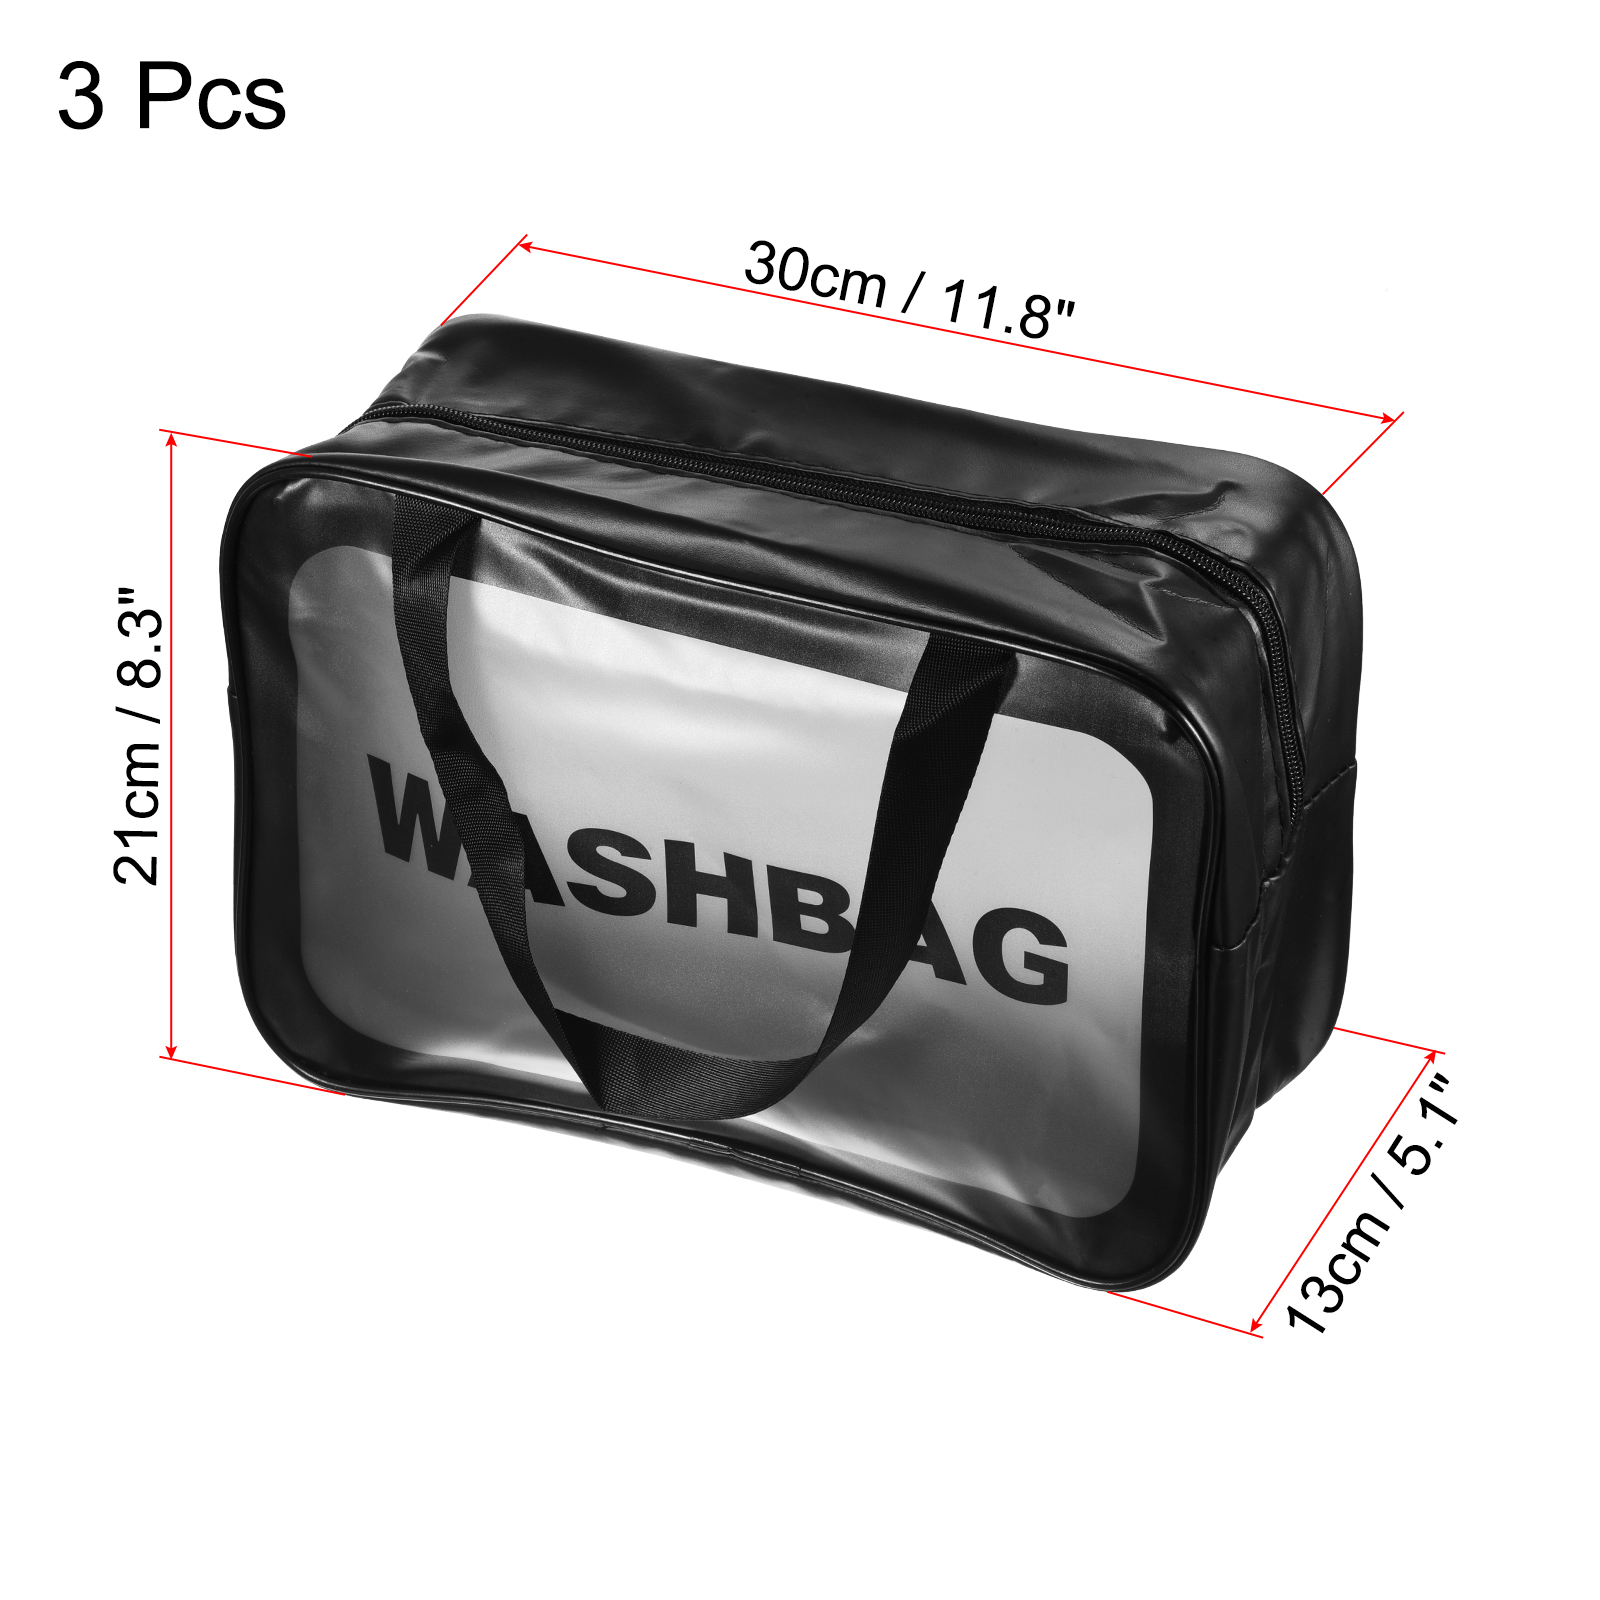 Uxcell 8.3"x11.8"x5.1" PVC Clear Toiletry Bag Makeup Bags with Zipper Handle Black 3 Pack - image 2 of 5